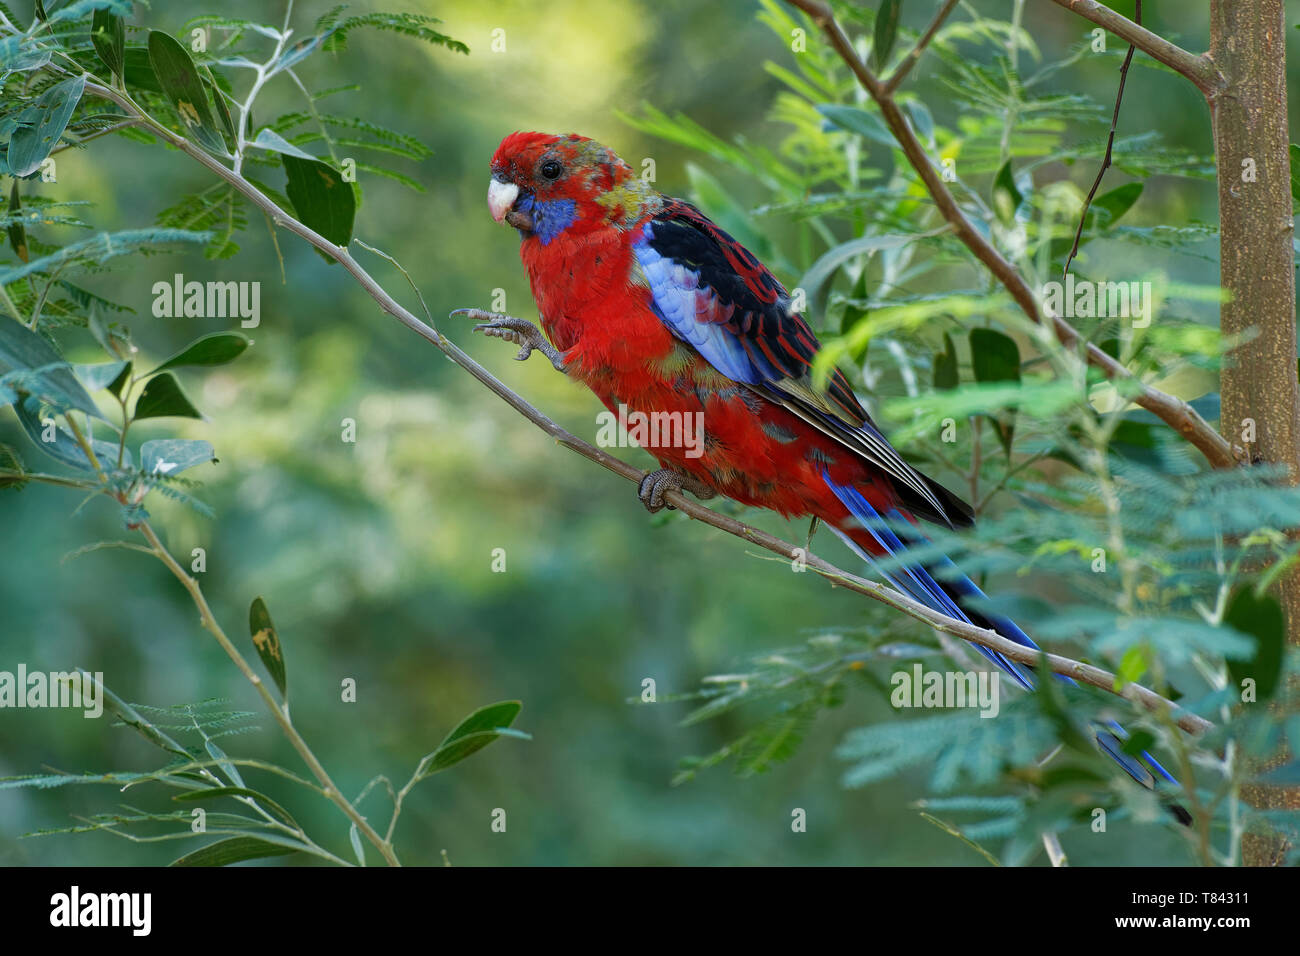 Crimson Rosella - Platycercus elegans a parrot native to eastern and south eastern Australia, introduced to New Zealand and Norfolk Island, mountain f Stock Photo